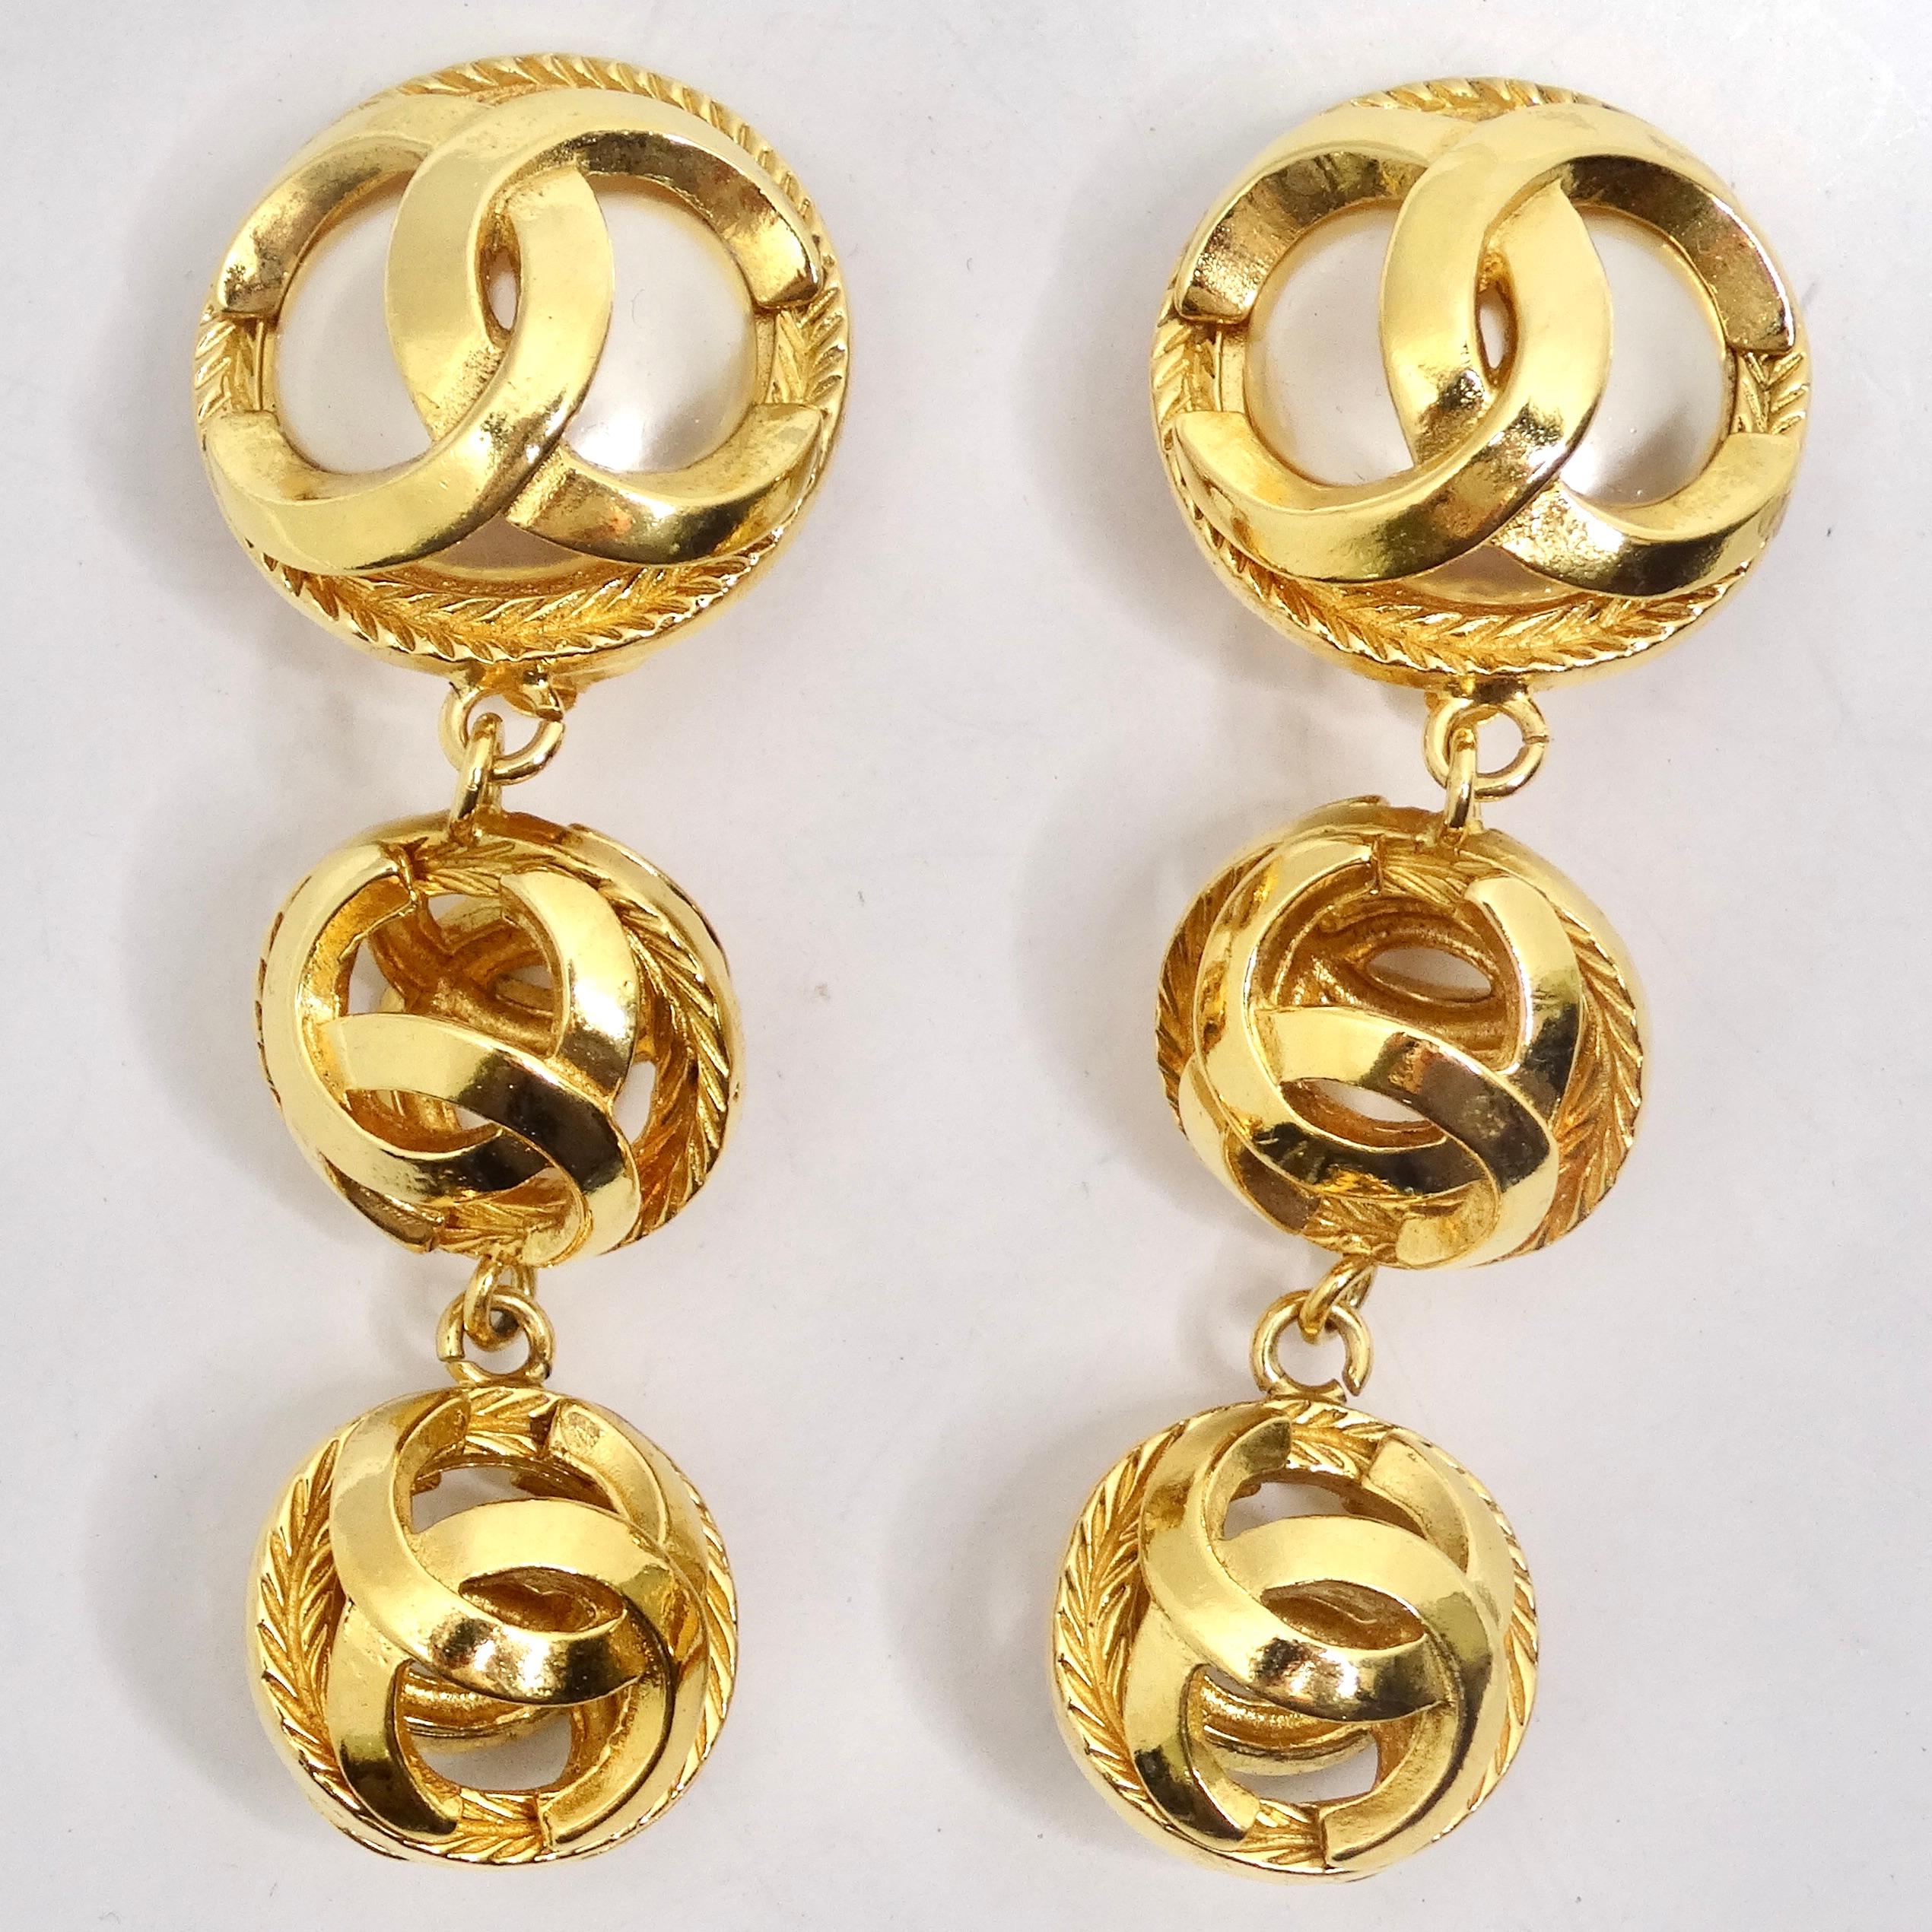 Introducing a pair of exquisite earrings from the 1980s, the Chanel Gold Tone Pearl Drop Earrings. These earrings showcase the perfect combination of iconic Chanel design elements, making them a must-have for those who appreciate classic